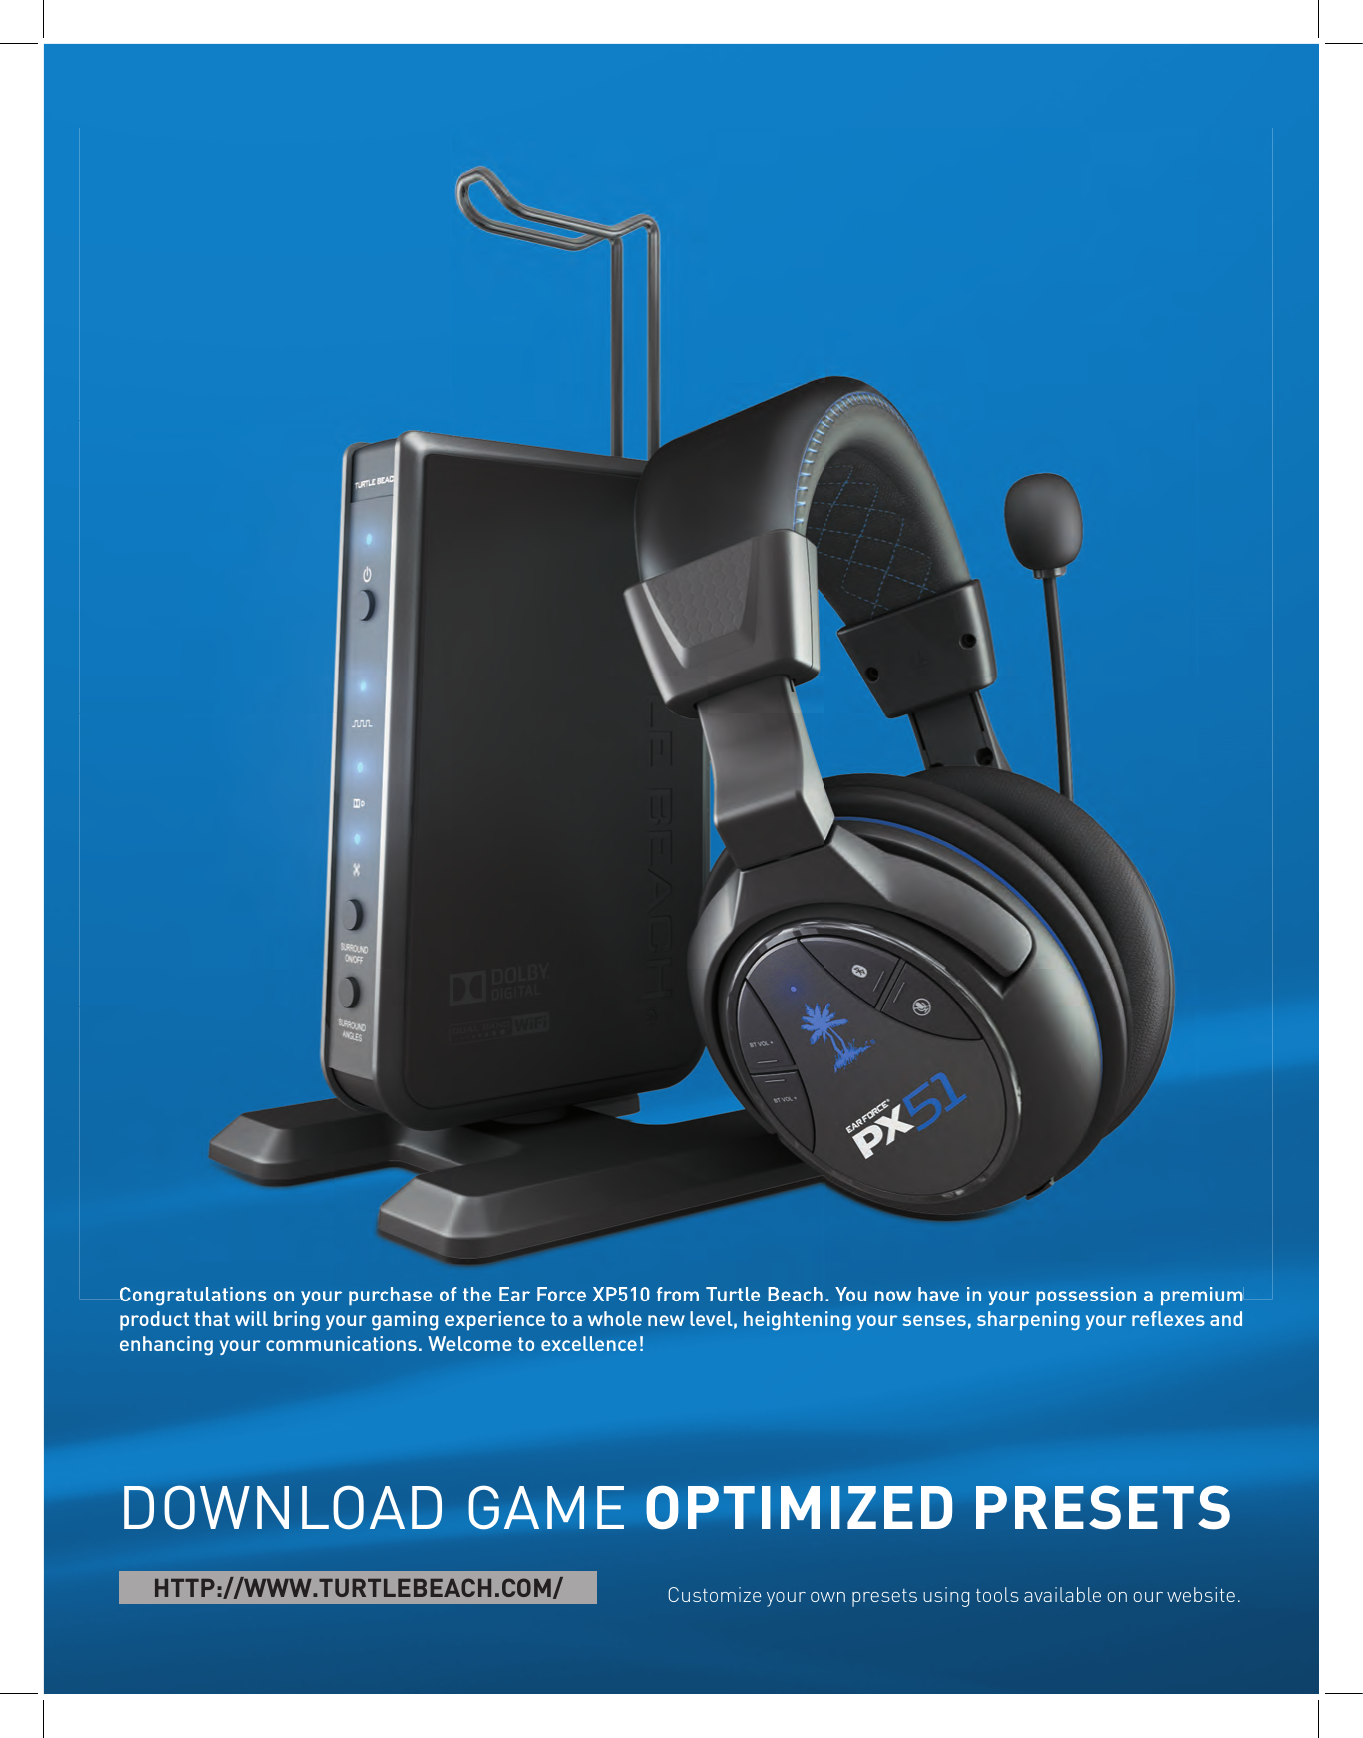 Congratulations on your purchase of the Ear Force XP510 from Turtle Beach. You now have in your possession a premium product that will bring your gaming experience to a whole new level, heightening your senses, sharpening your reﬂ exes and enhancing your communications. Welcome to excellence!DOWNLOAD GAME OPTIMIZED PRESETSCustomize your own presets using tools available on our website. HTTP://WWW.TURTLEBEACH.COM/Congratulations on your purchase of the Ear Force XP510 from Turtle Beach. You now have in your possession a premium 